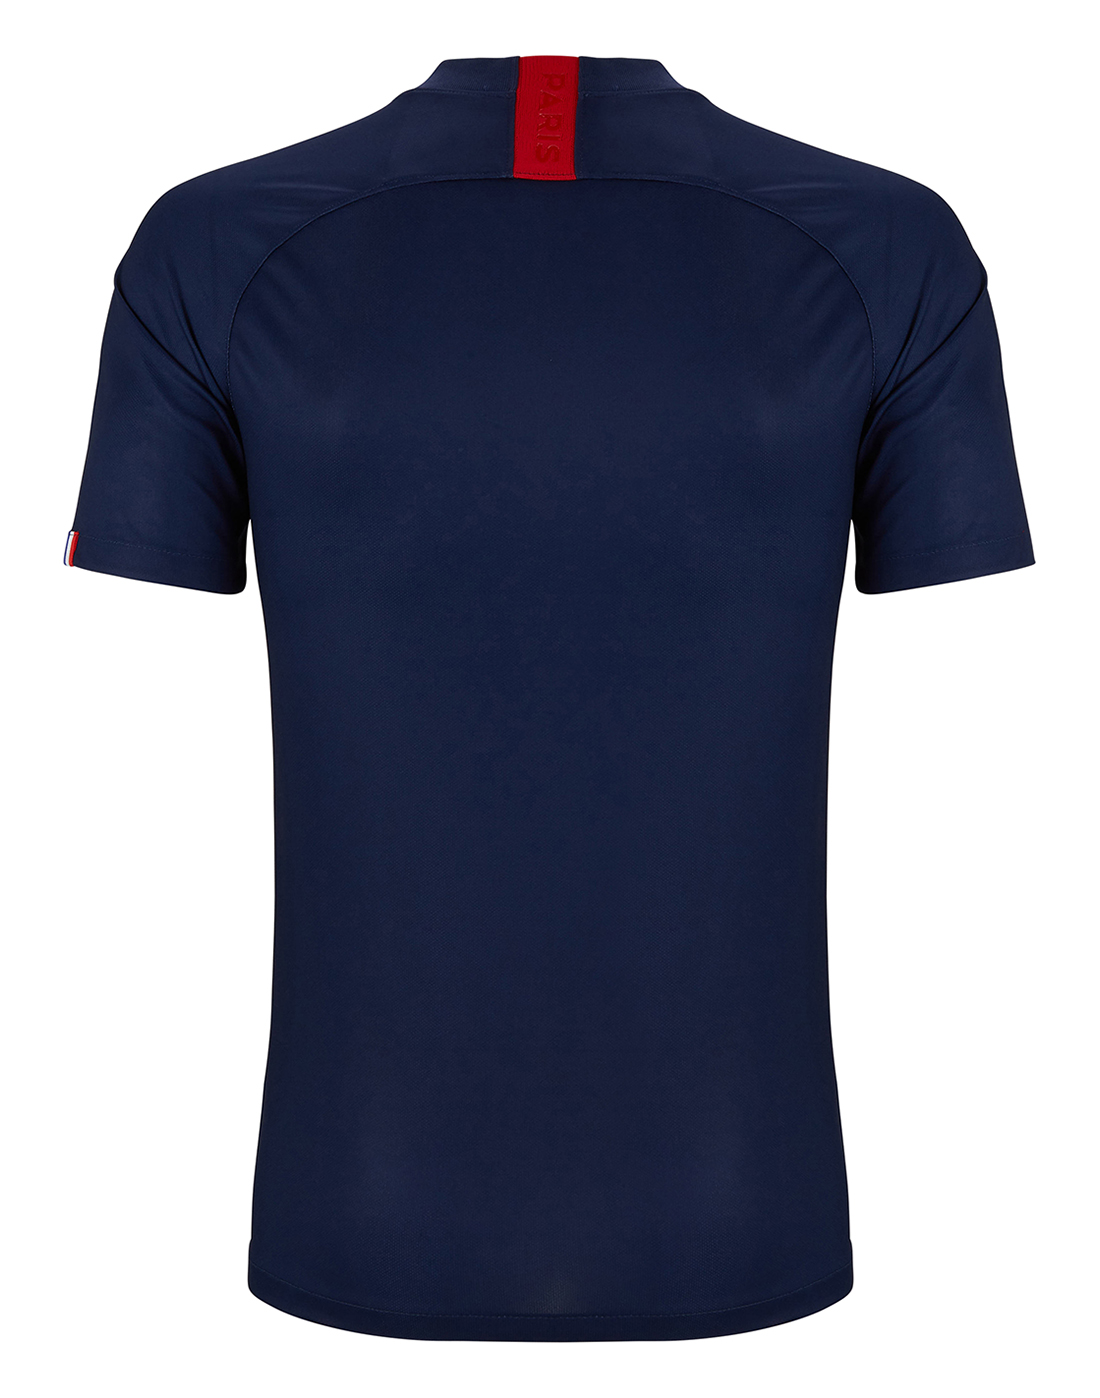 Nike Adult PSG 19/20 Home Jersey - Navy | Life Style Sports IE